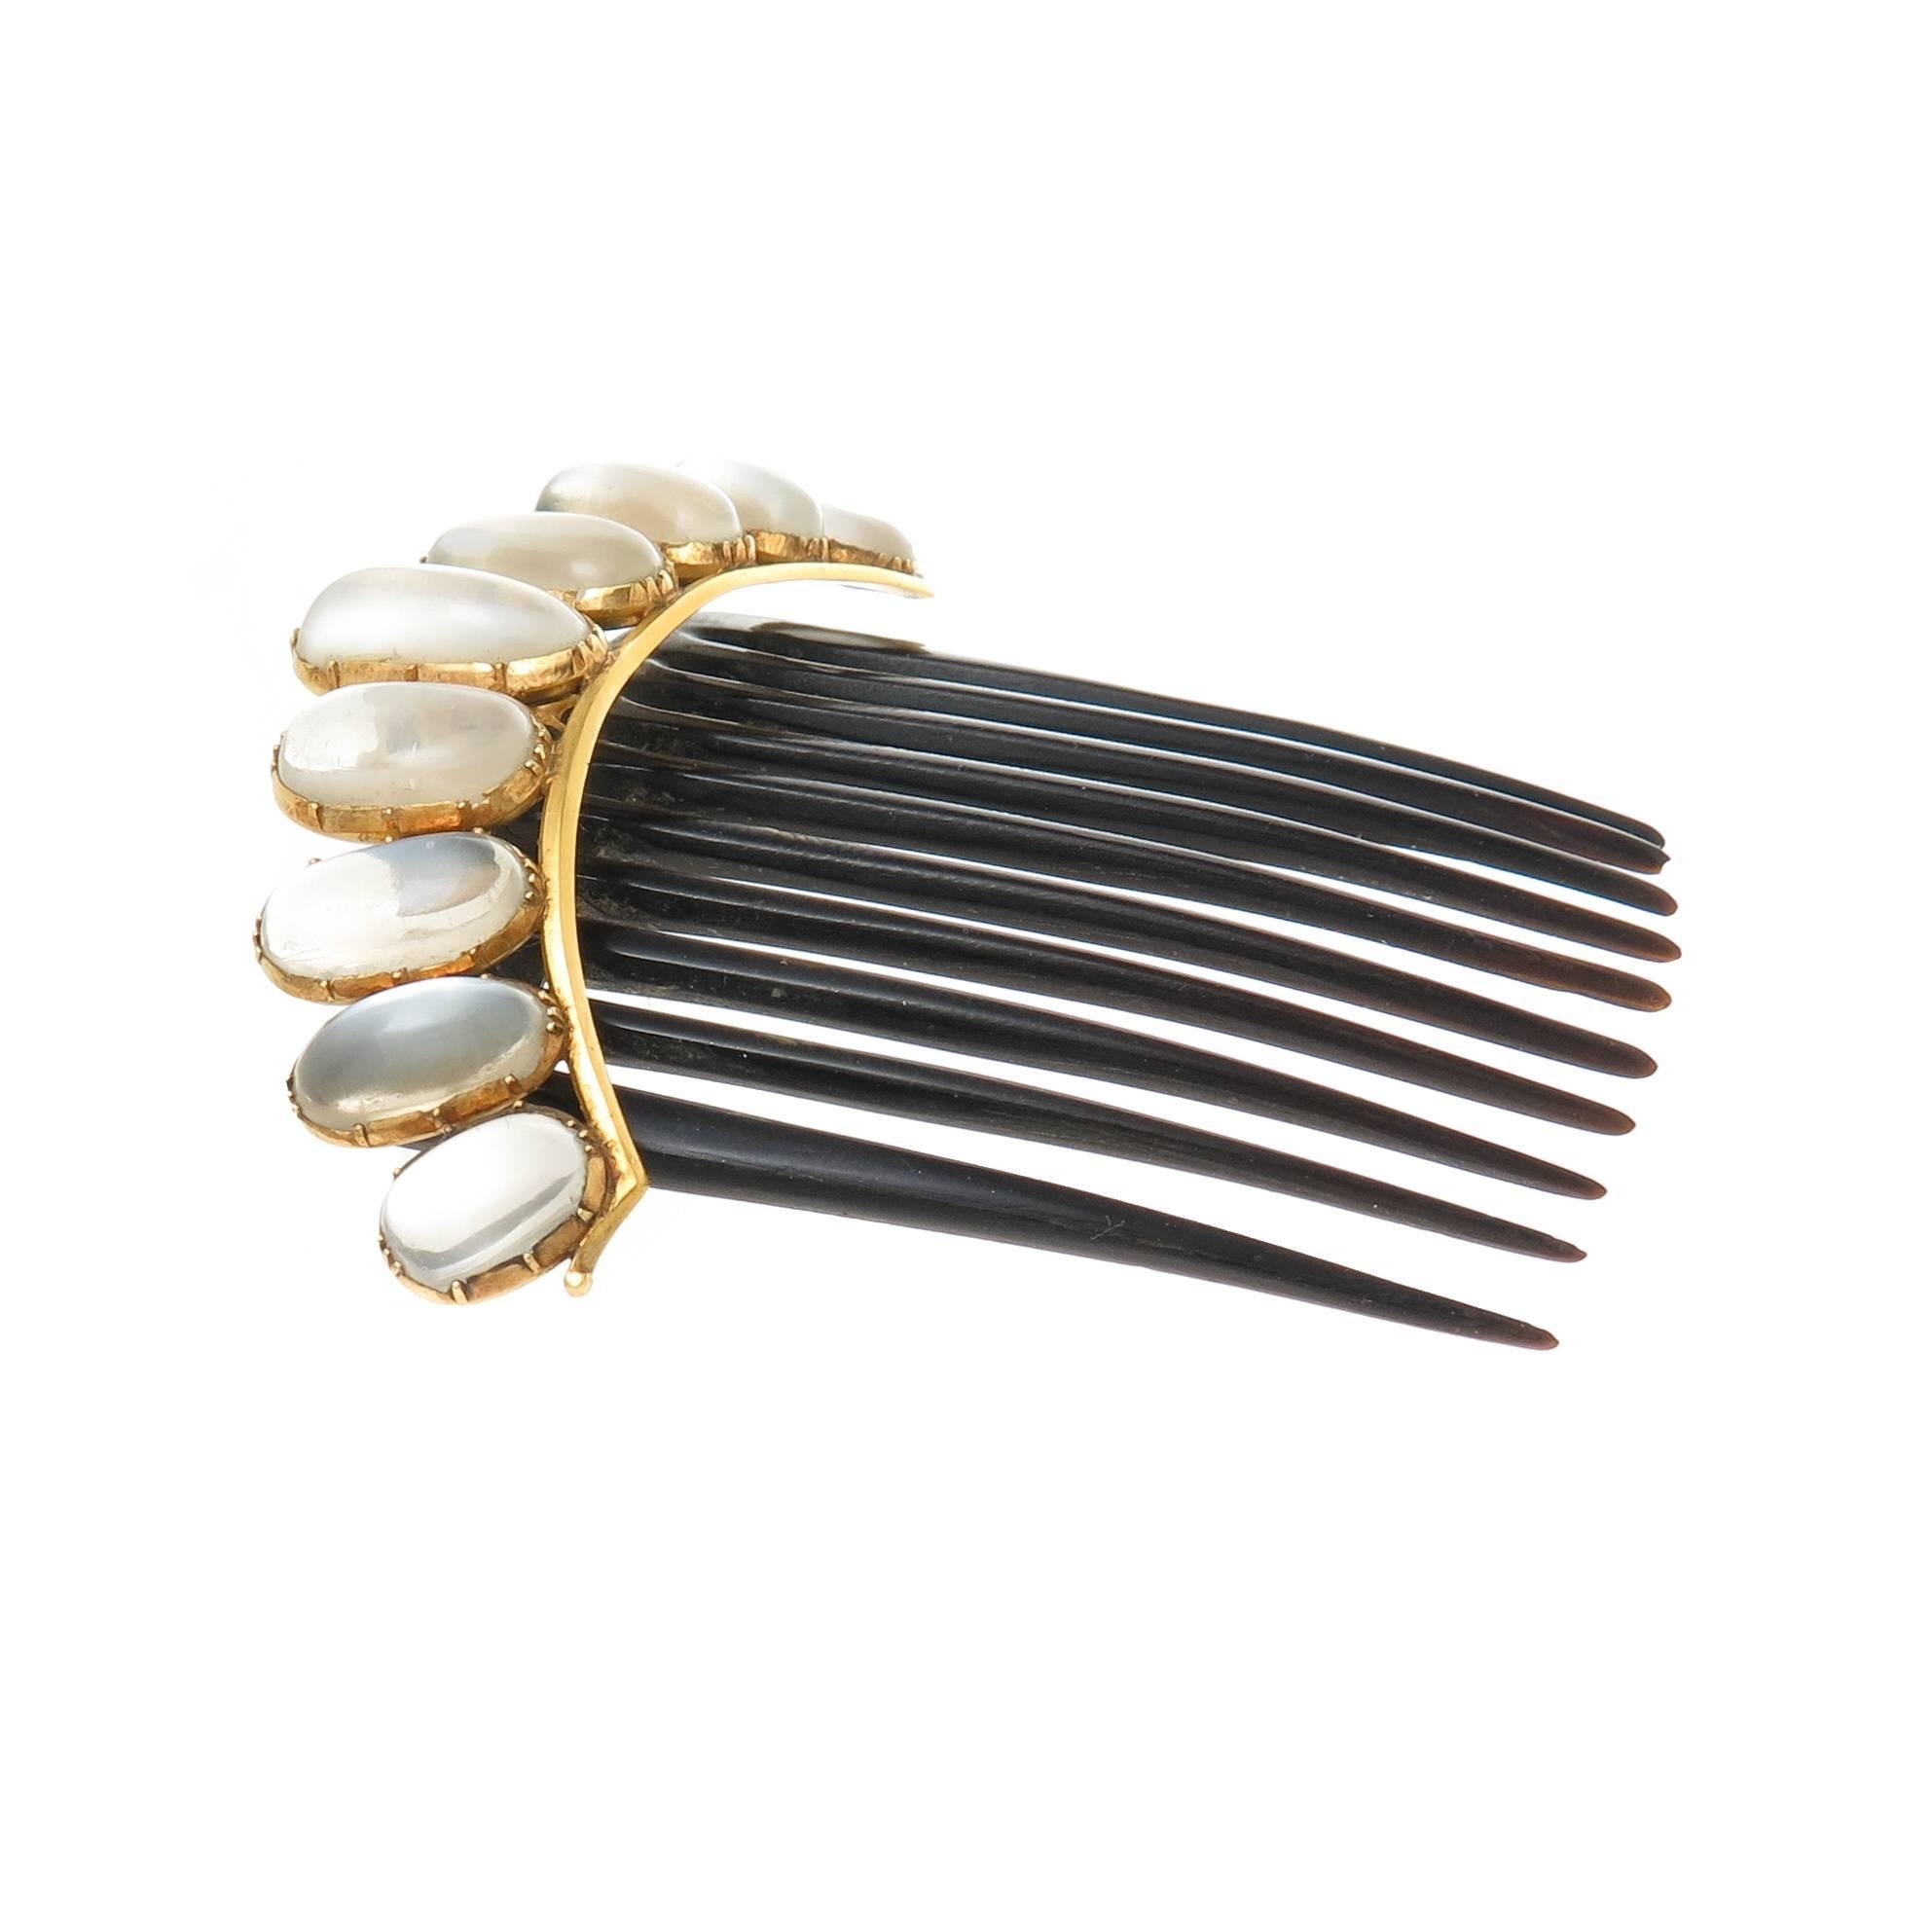 Circa 1890s Yellow Gold and Moon Stone Hair Comb, an outstanding  example of Victorian Hair ornamentation, measuring 3 inch across and set with Very fine color moonstones measuring 11 X 7 MM to 17 X 7 MM. There is a hinge attachment to the Tortoise